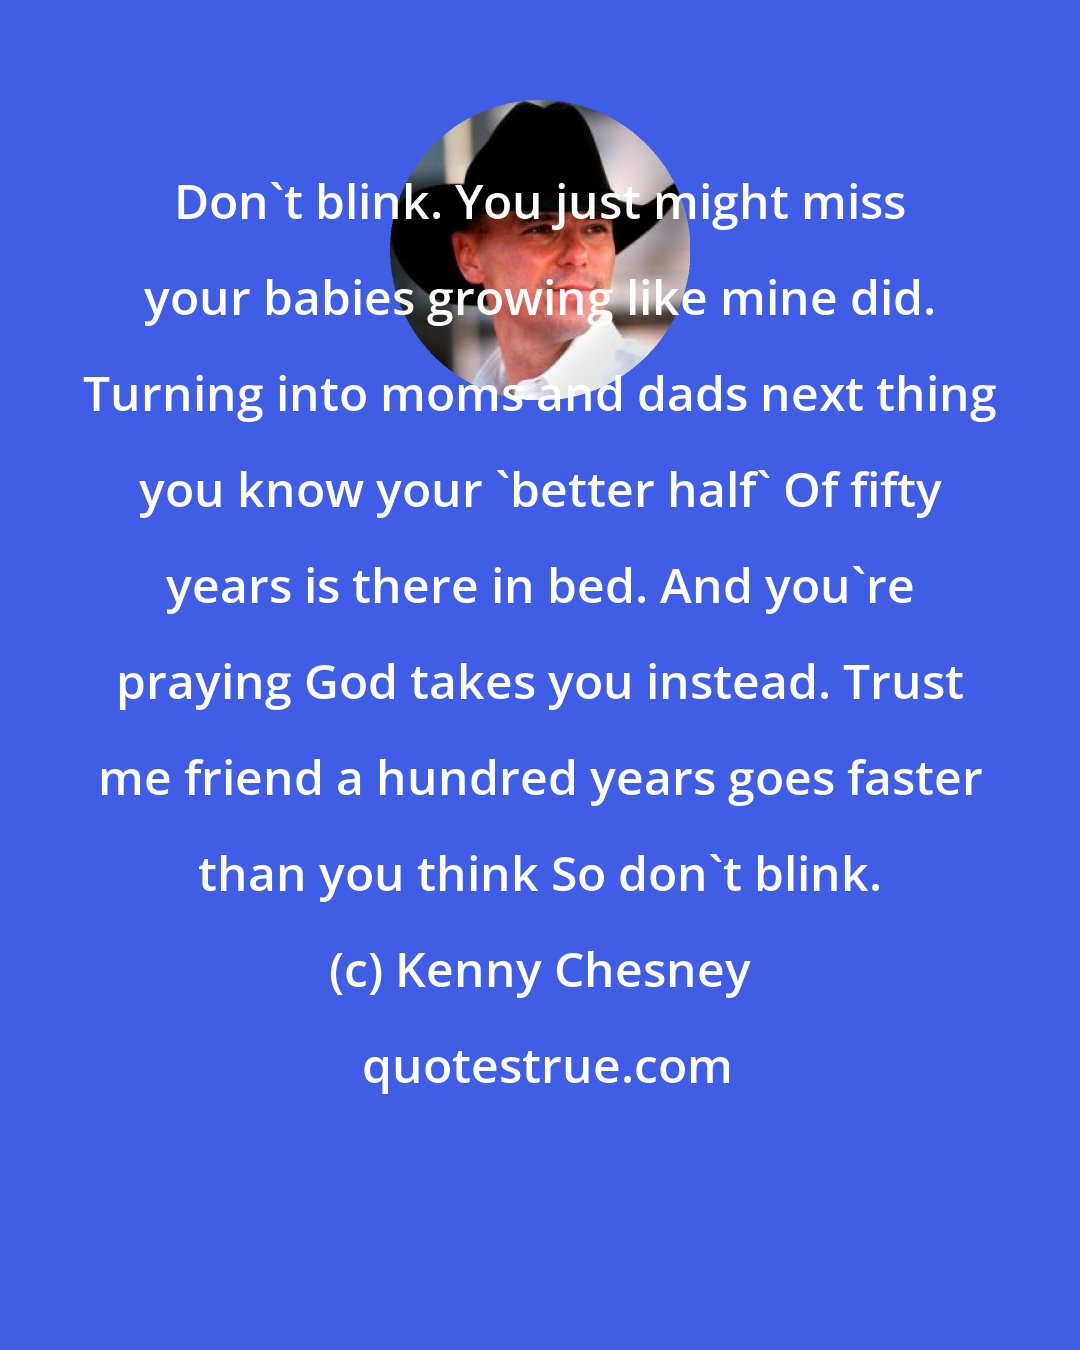 Kenny Chesney: Don't blink. You just might miss your babies growing like mine did. Turning into moms and dads next thing you know your 'better half' Of fifty years is there in bed. And you're praying God takes you instead. Trust me friend a hundred years goes faster than you think So don't blink.